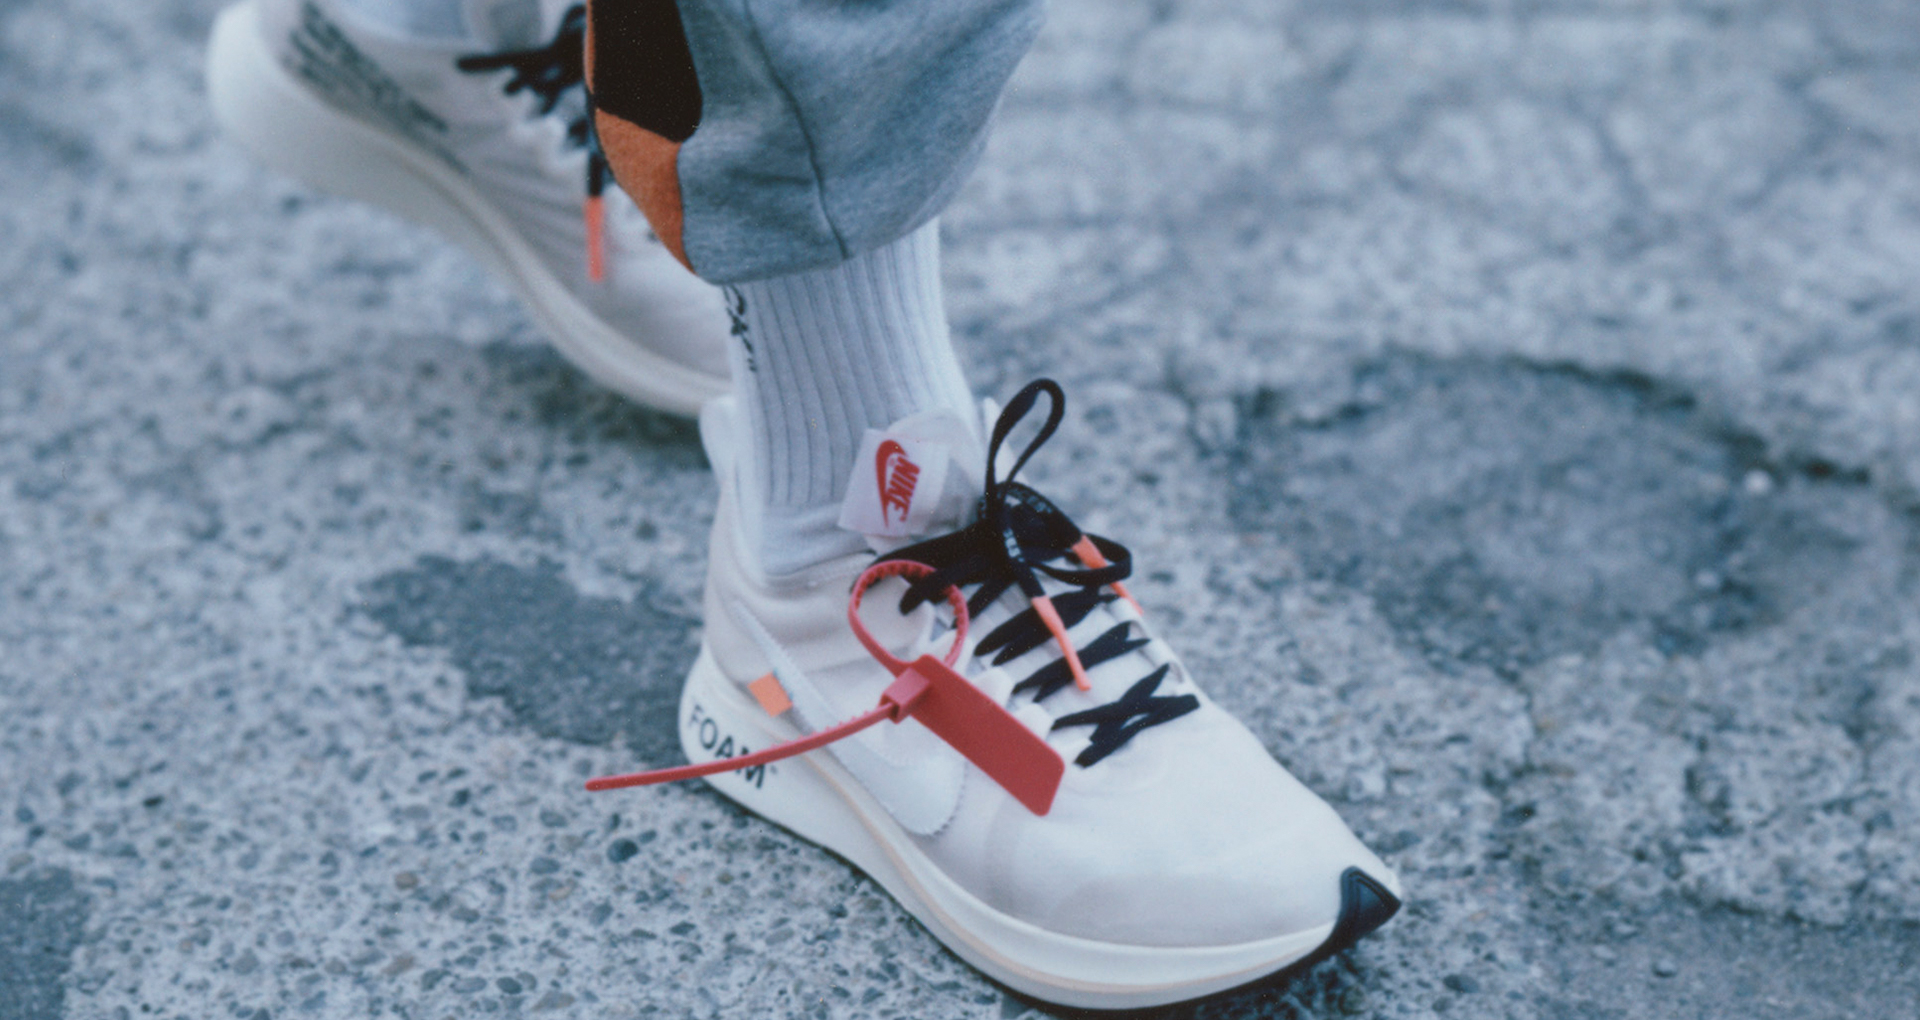 nike the ten zoom fly off white